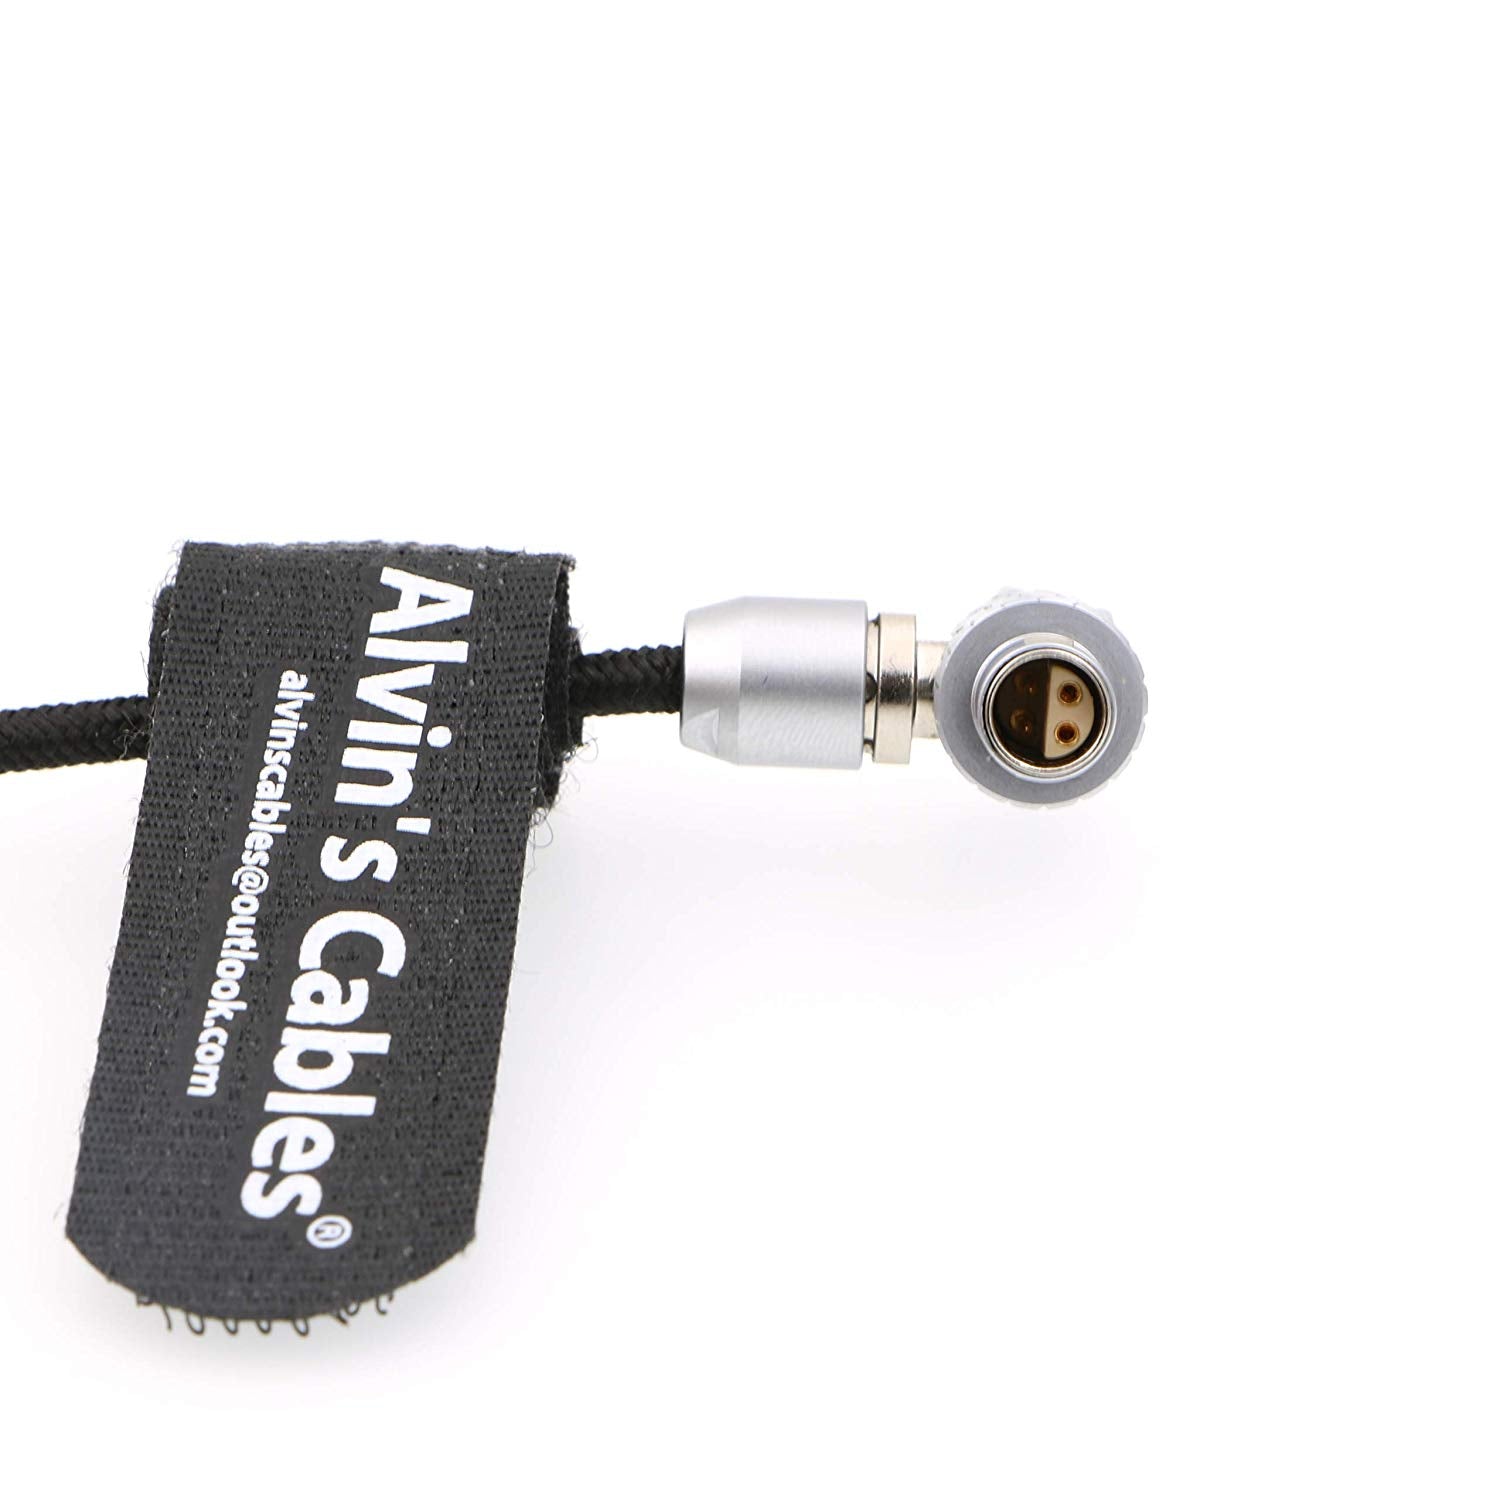 Alvin's Cables Z CAM E2 Camera Right Angle Power Cable Flexible 90 Degrees 4 Pin to D Tap